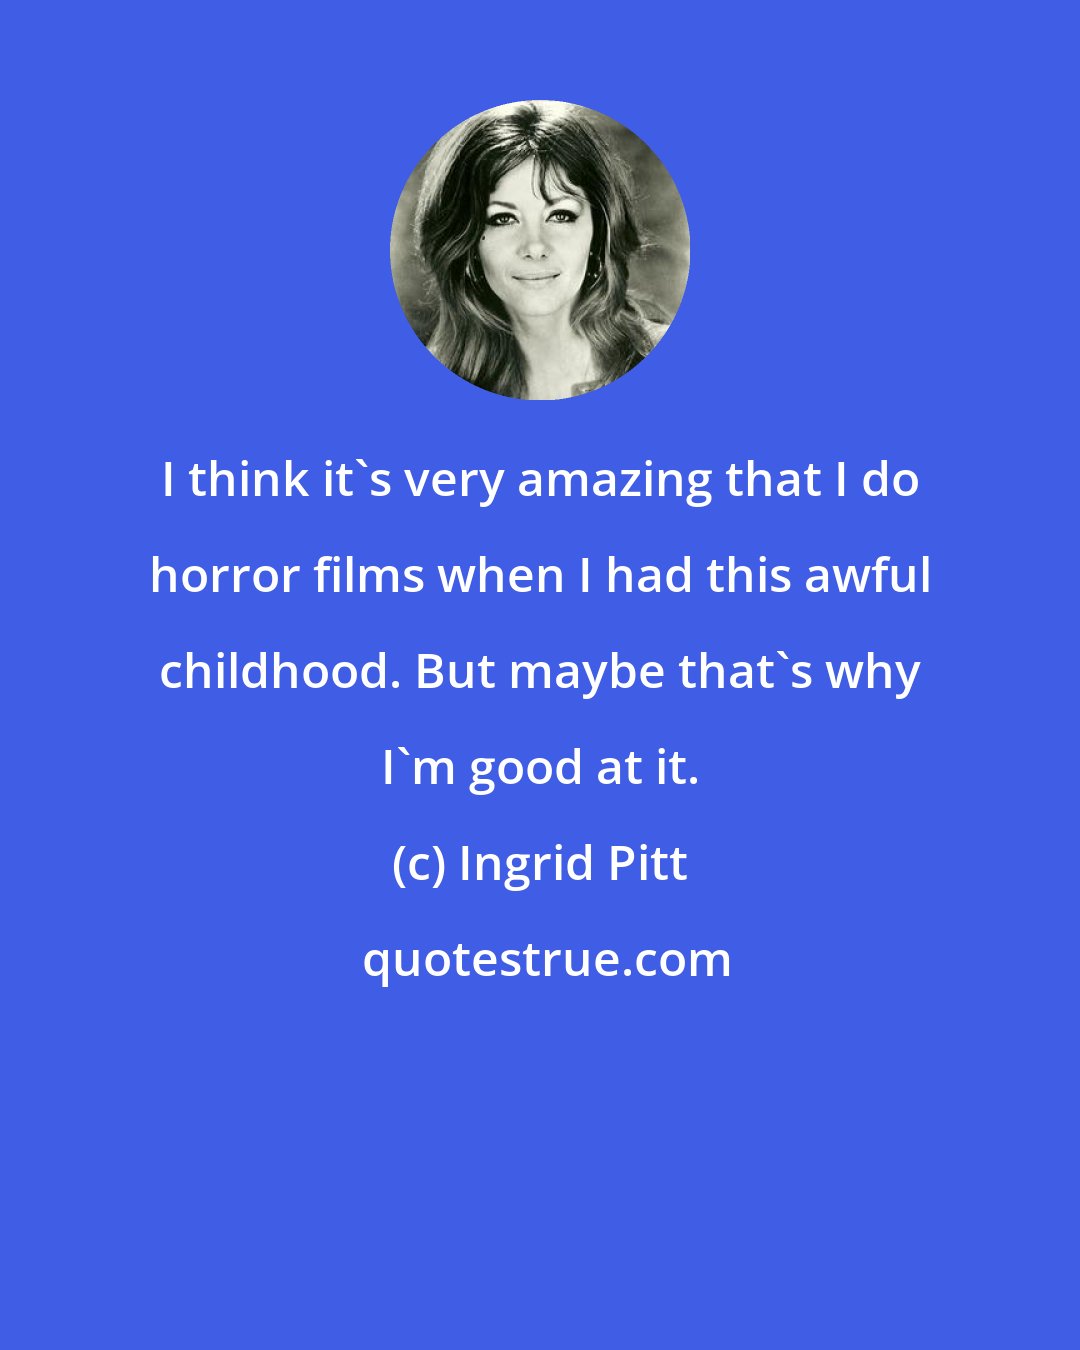 Ingrid Pitt: I think it's very amazing that I do horror films when I had this awful childhood. But maybe that's why I'm good at it.